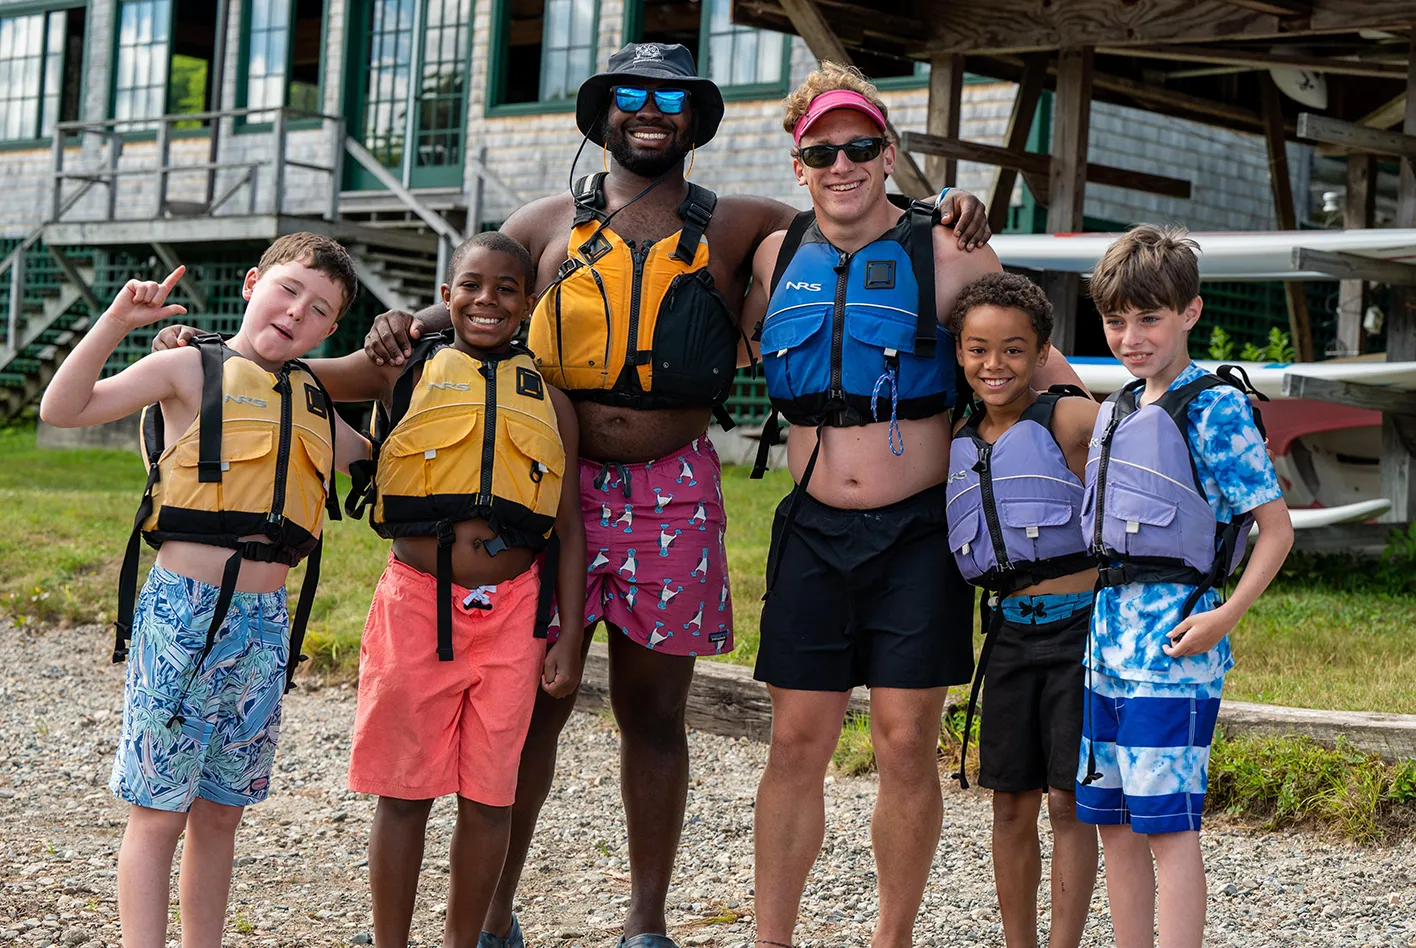 Campers and staff wearing life jackets, smiling